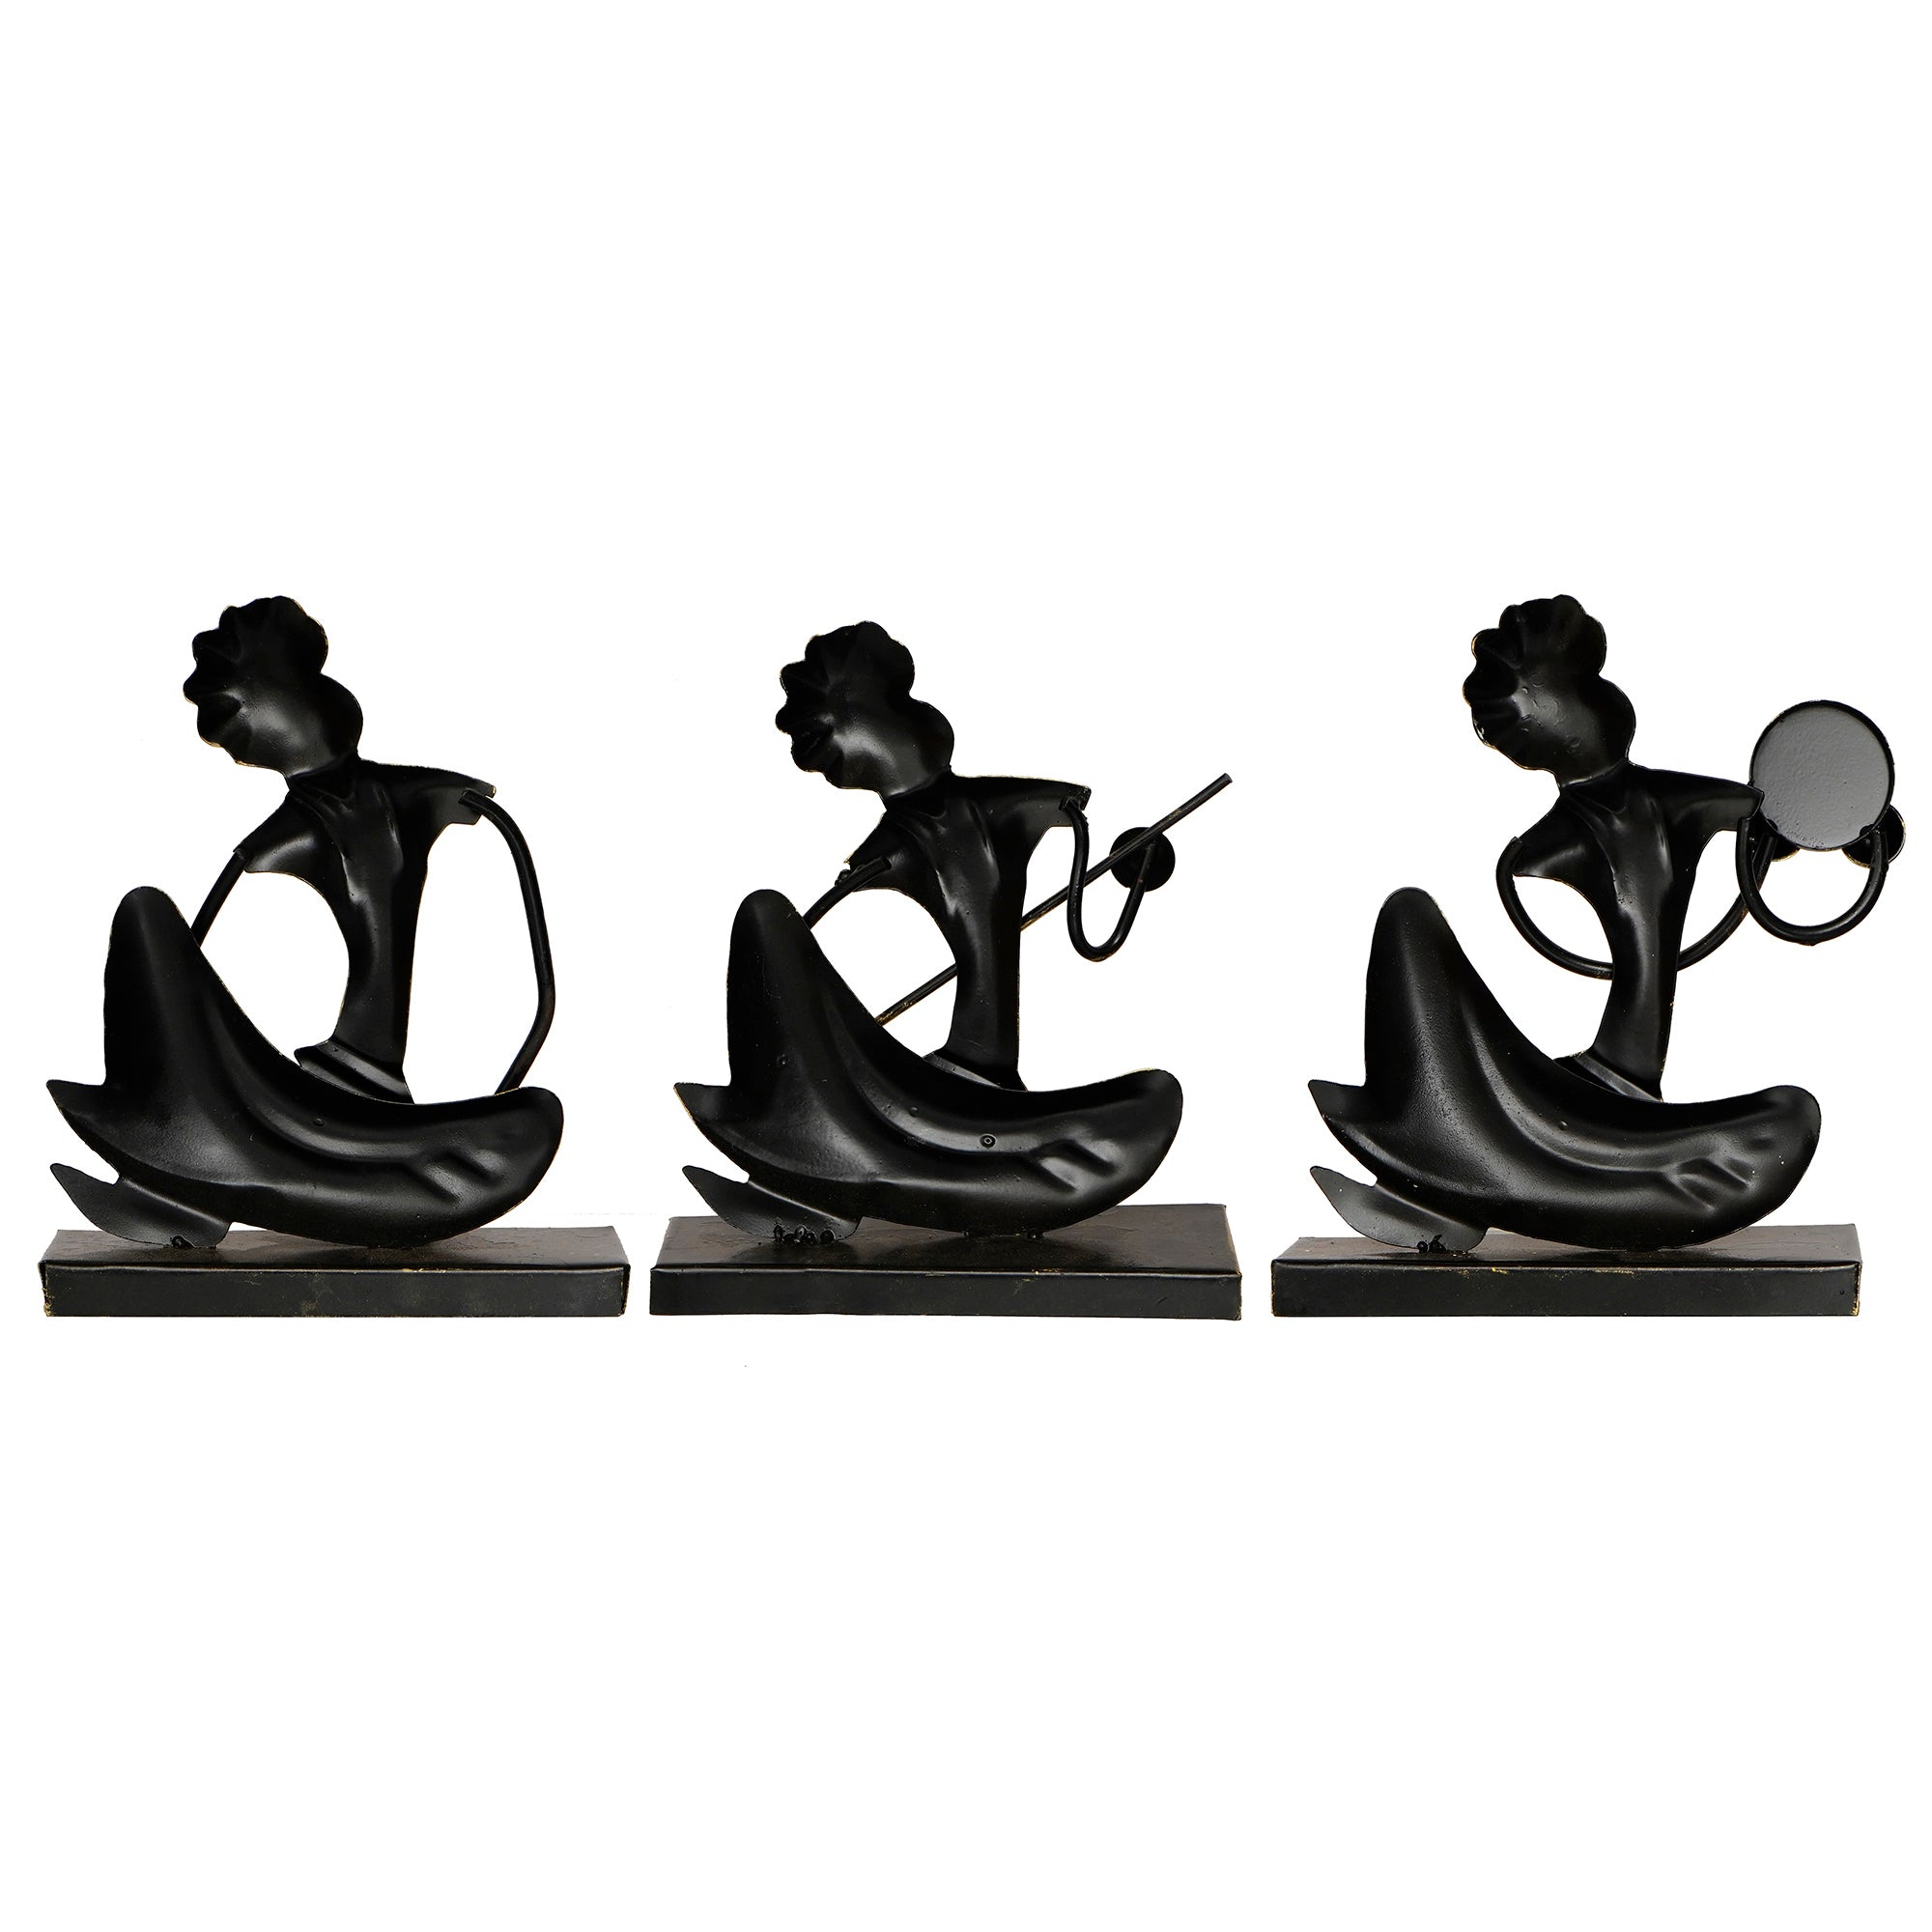 Iron Set of 3 Tribal Man Figurines with Paghdi Playing Tambourine/Dafli, Banjo, Dholak Musical Instruments Decorative Showpiece (Golden and Black) 5